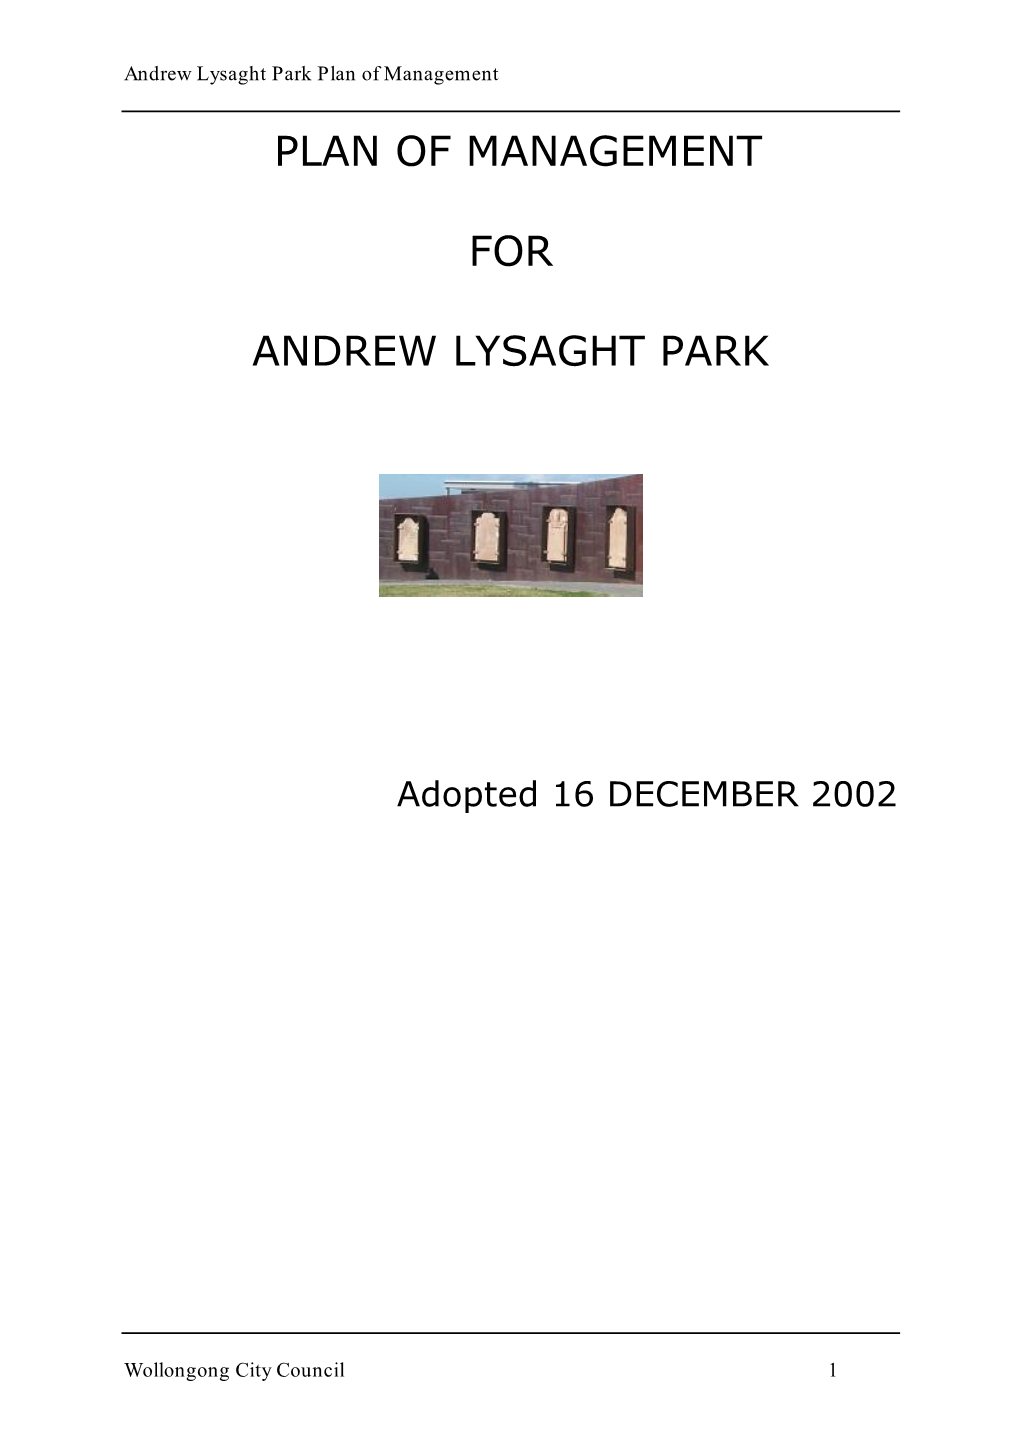 Plan of Management for Andrew Lysaght Park and That the Park Continues to Be Maintained As a Rest Park